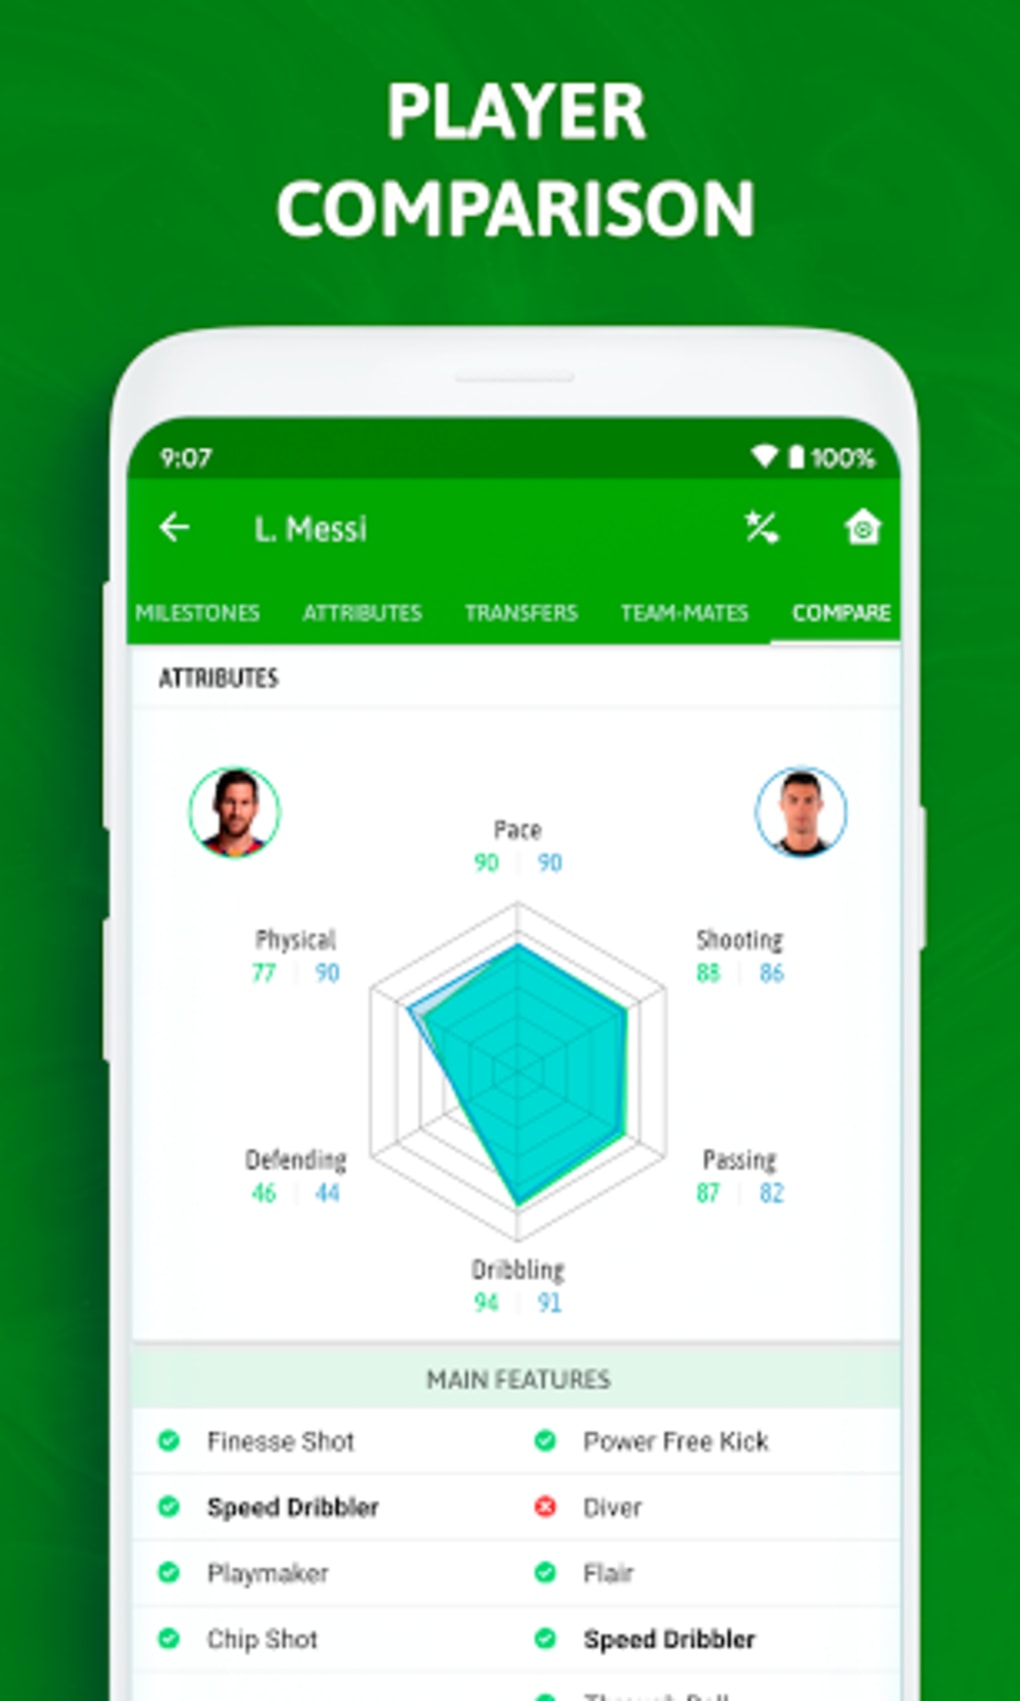 BeSoccer - Soccer Live Score APK for Android - Download